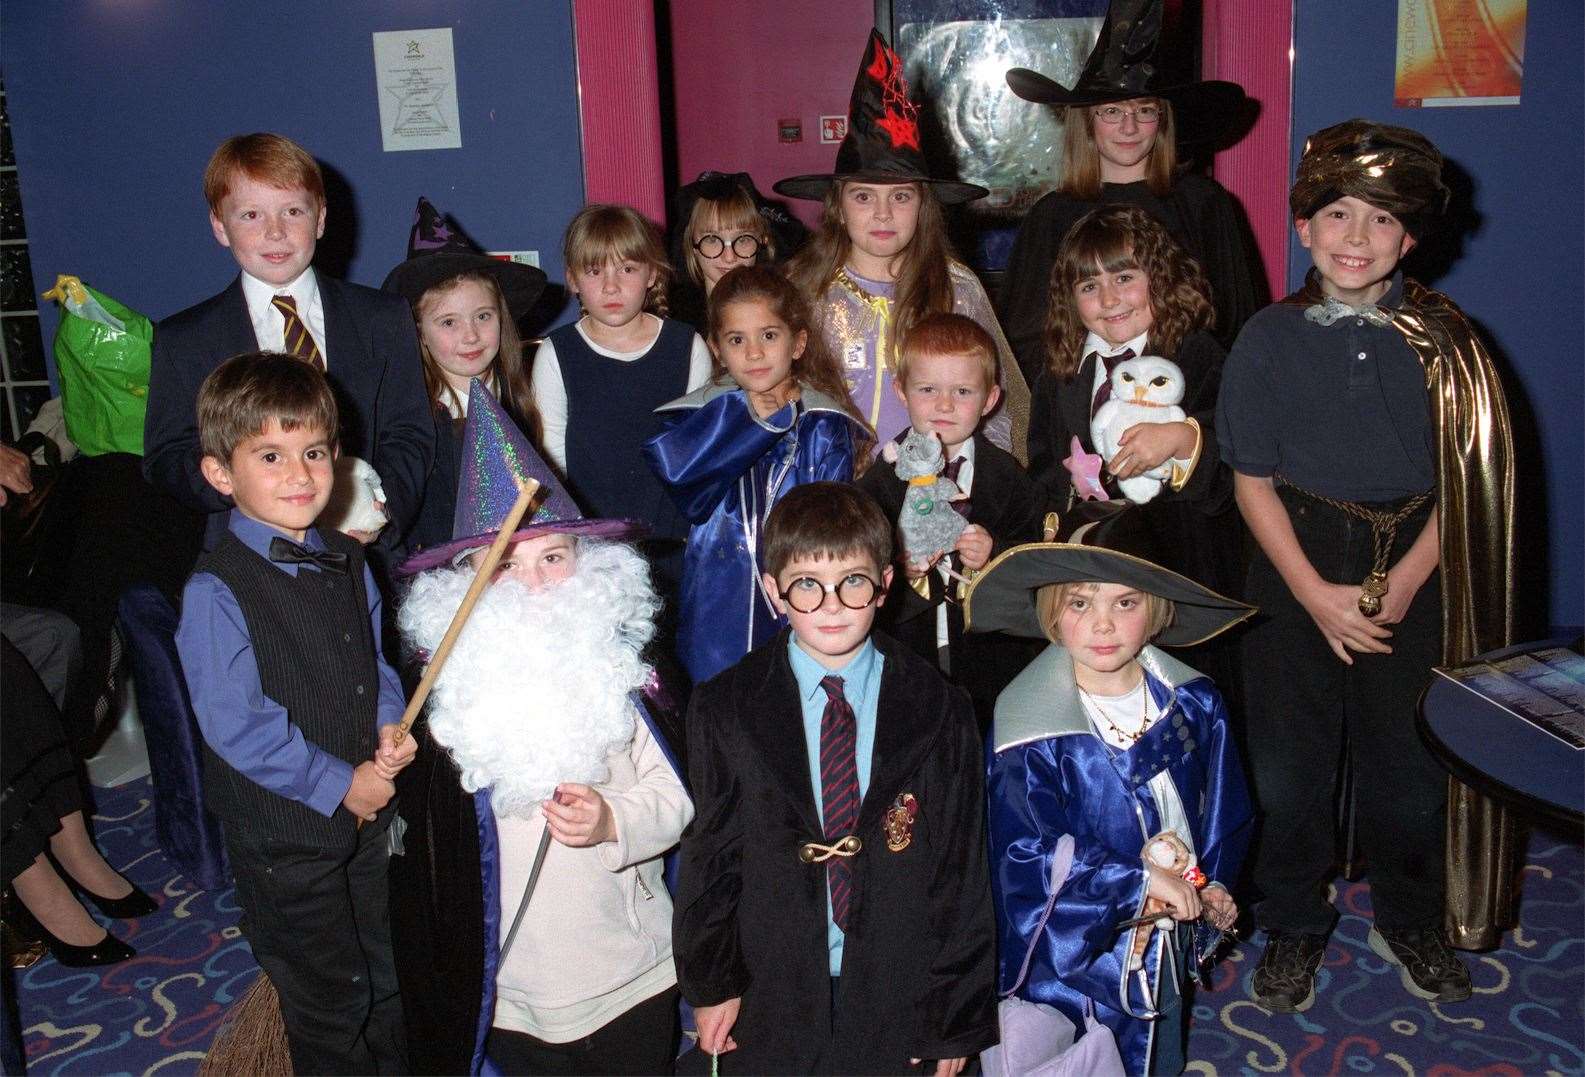 Harry Potter fans waiting to see their favourite book on film, November 2001